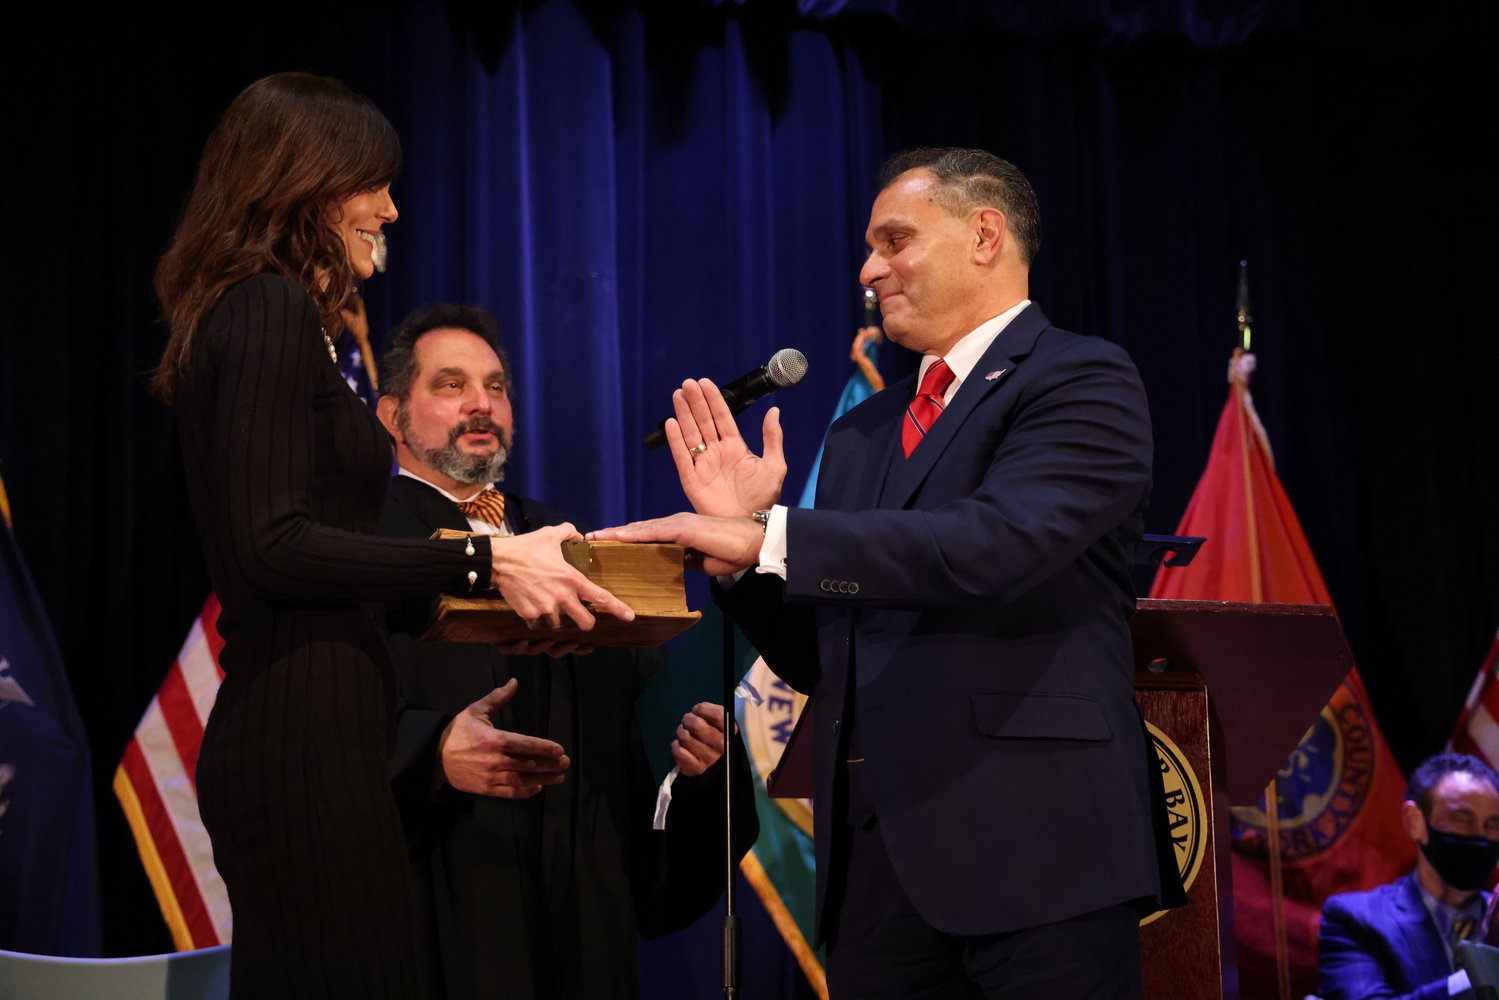 Supervisor Joseph Saladino’s brother, Judge James Saladino, left, installed his brother with Halina Howlett holding the Bible at Wednesday’s induction ceremony.